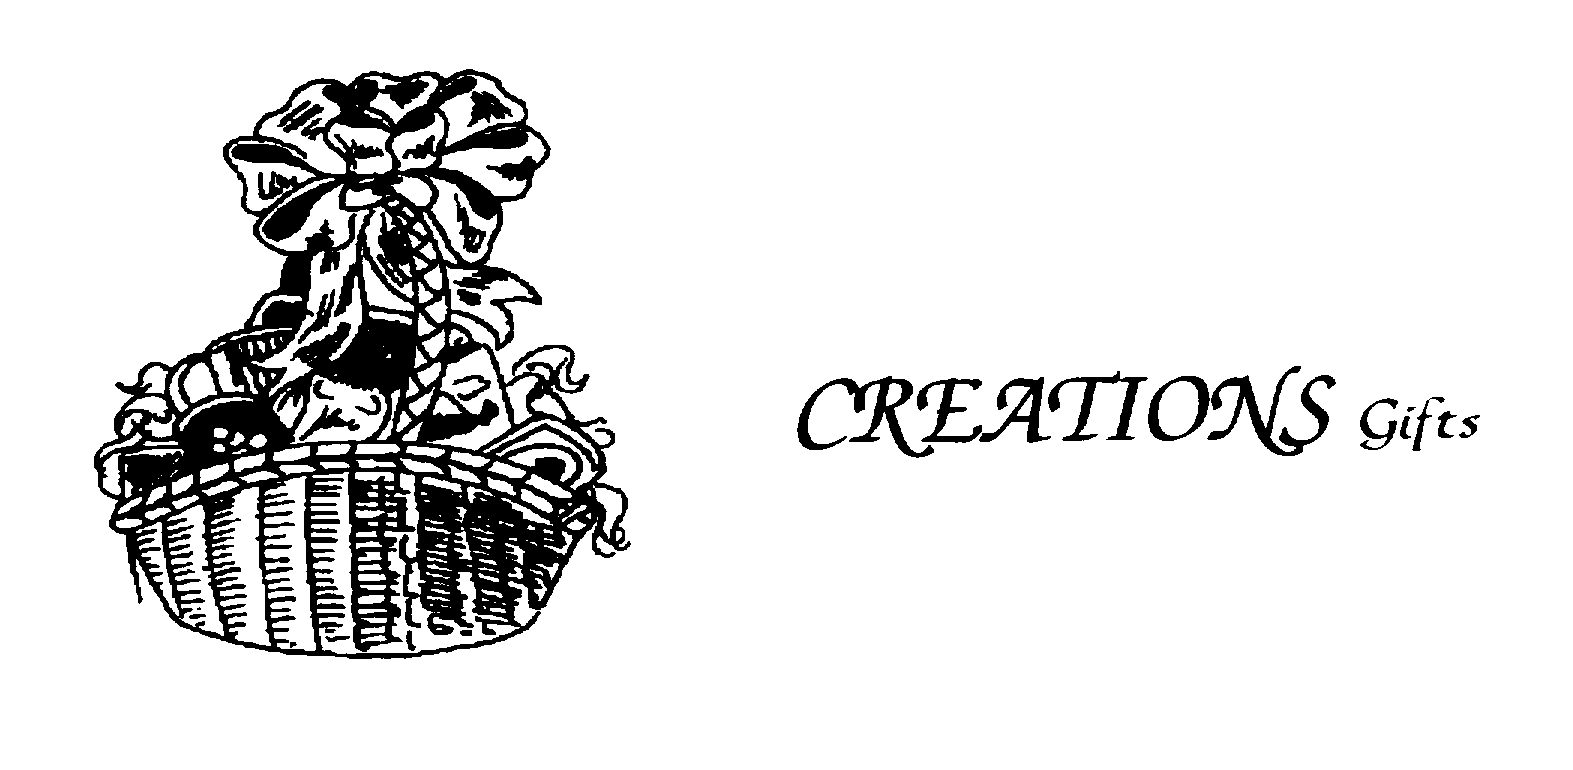  CREATIONS GIFTS